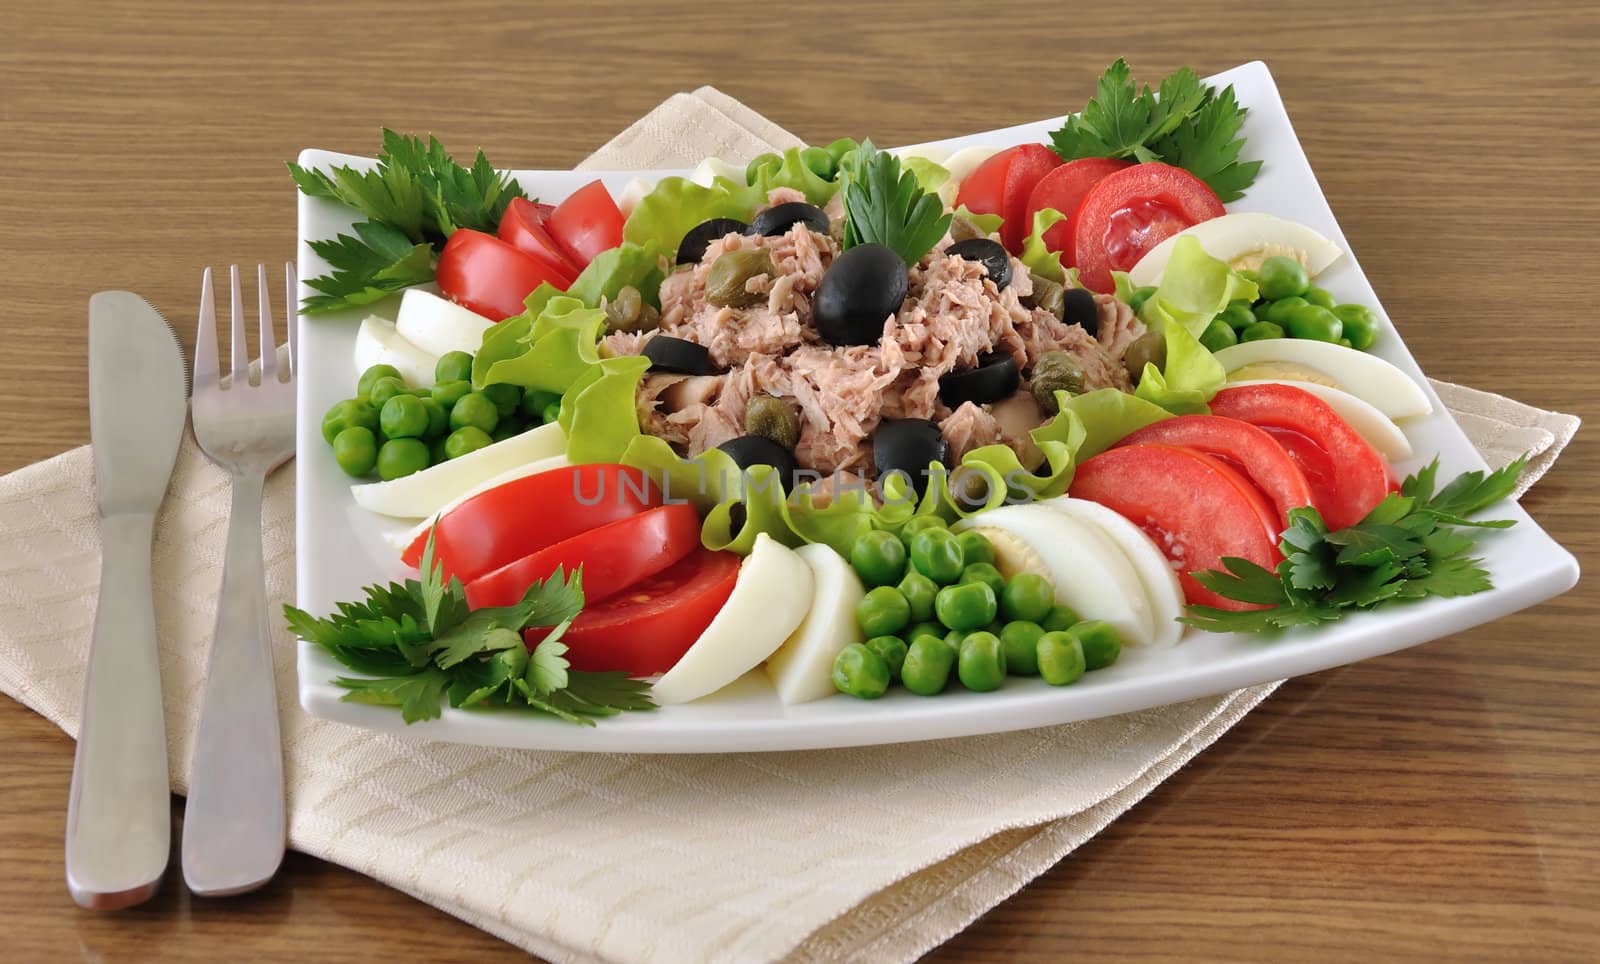 Tuna Salad and vegetables by Apolonia